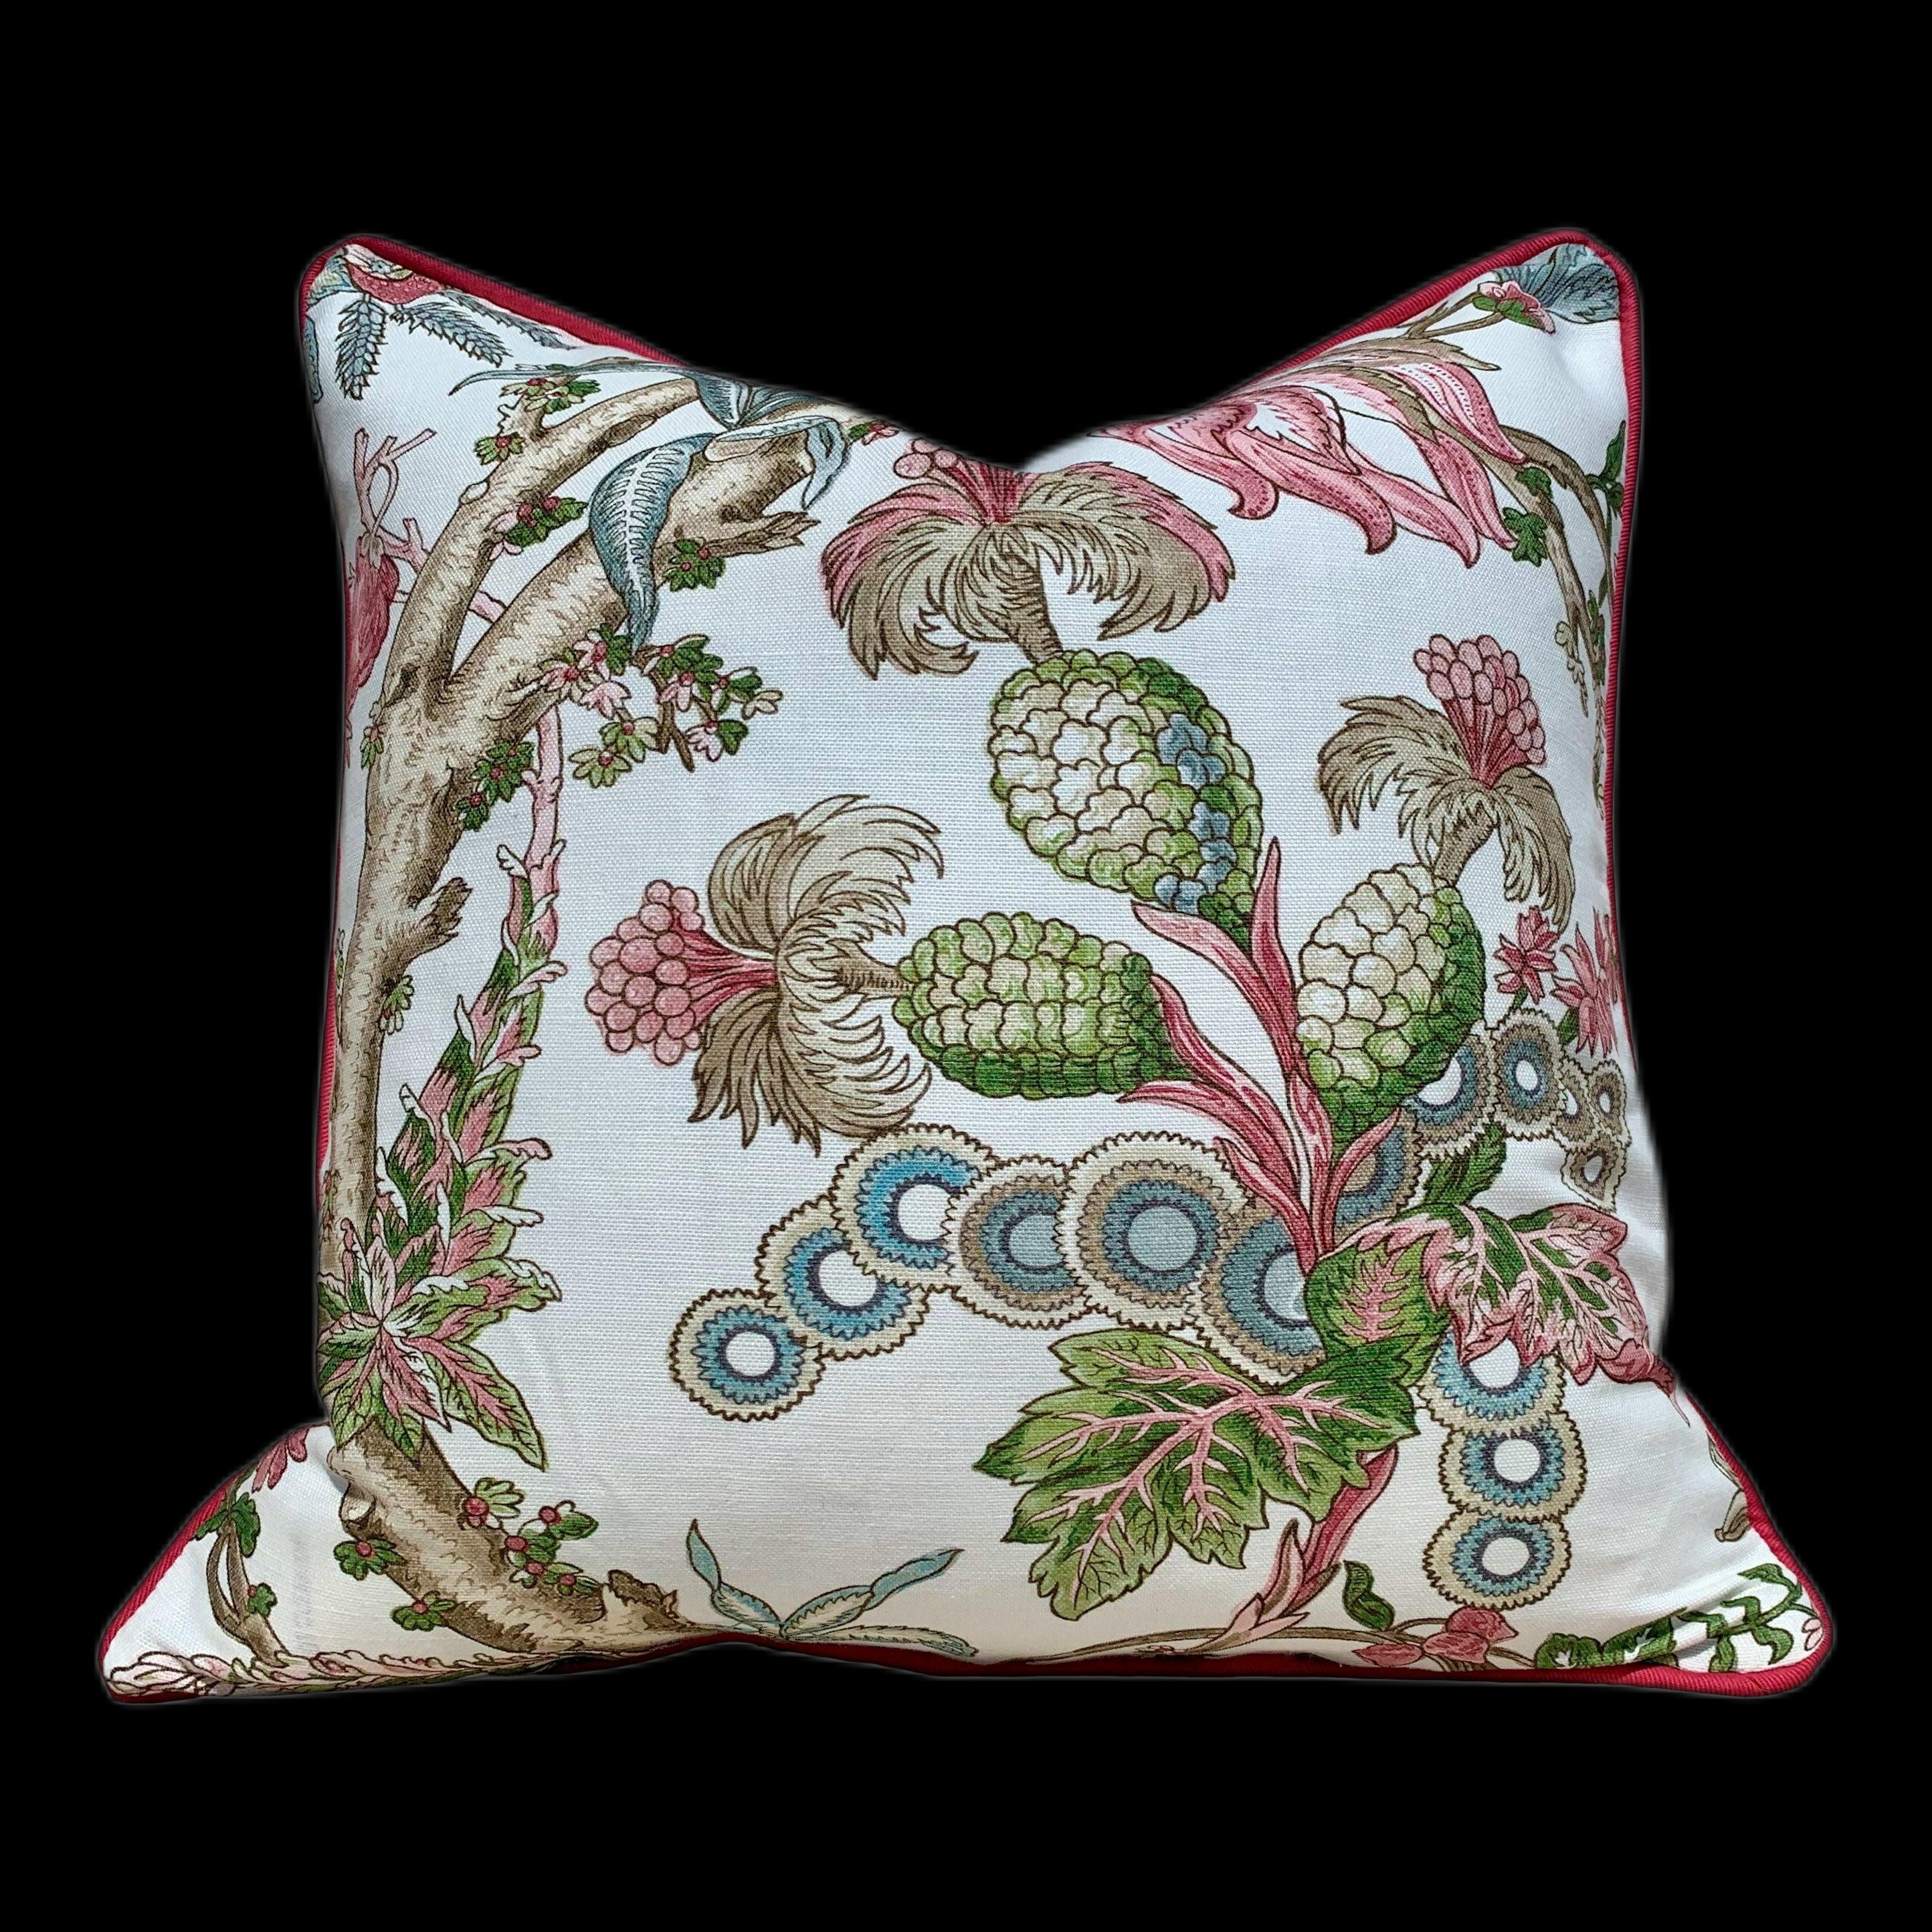 Chatelain Pillow Cover Blush Pink, Green. French Country Floral Decorative Pillow Cover in Blush Pink Green, Euro Sham in Pink and White